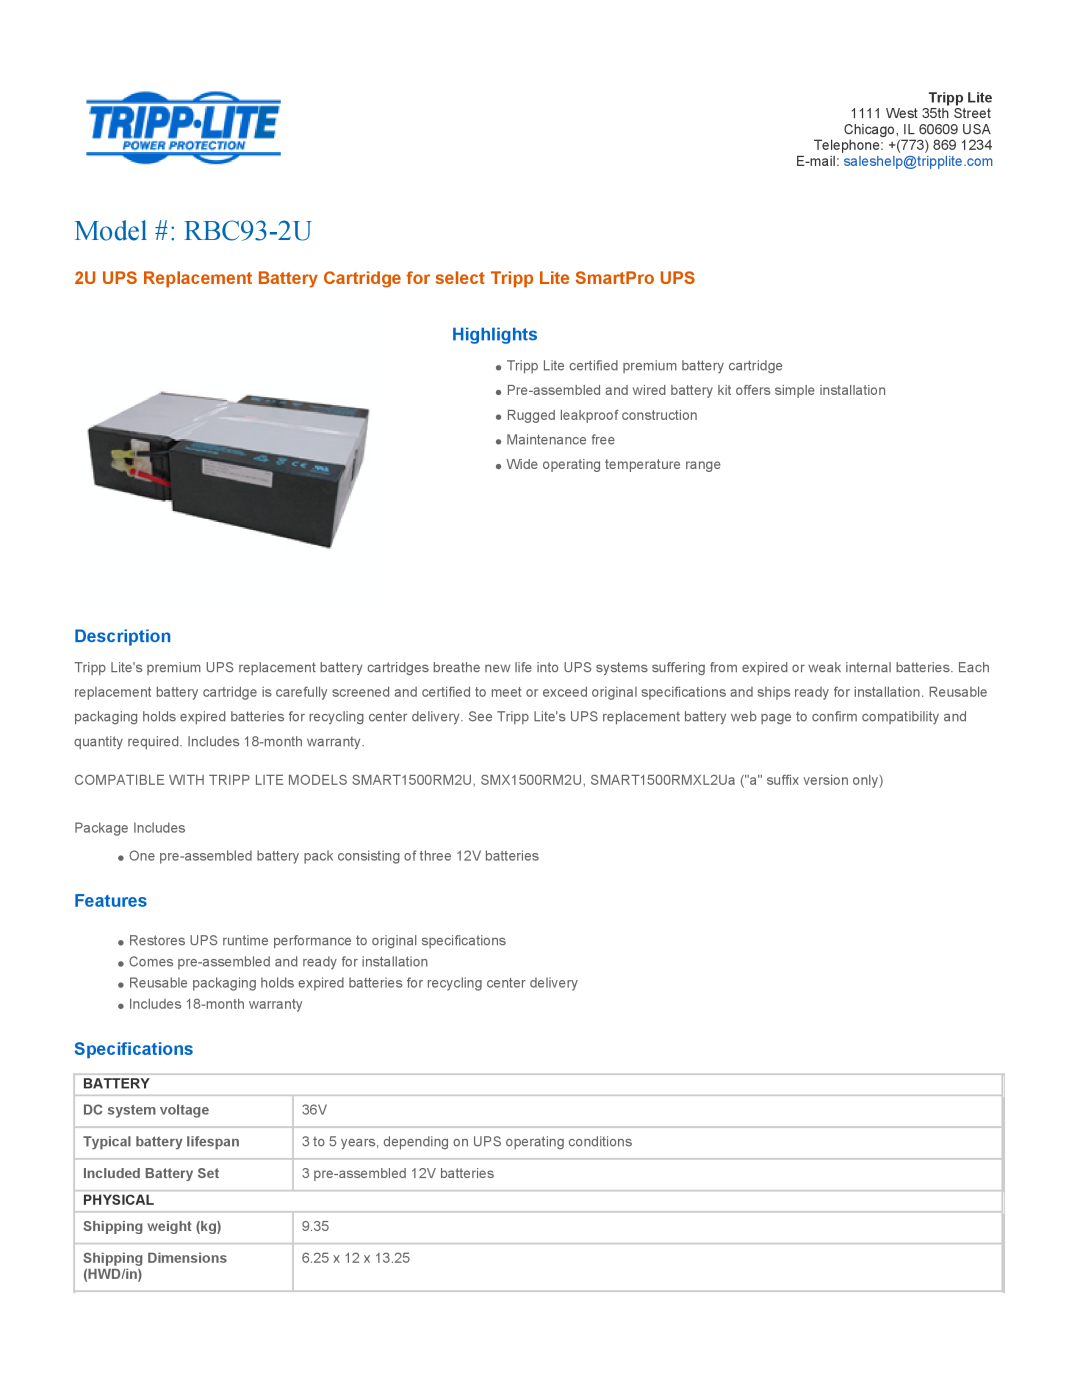 Tripp Lite RBC93-2U specifications DC system voltage, Typical battery lifespan, Included Battery Set, Physical, HWD/in 